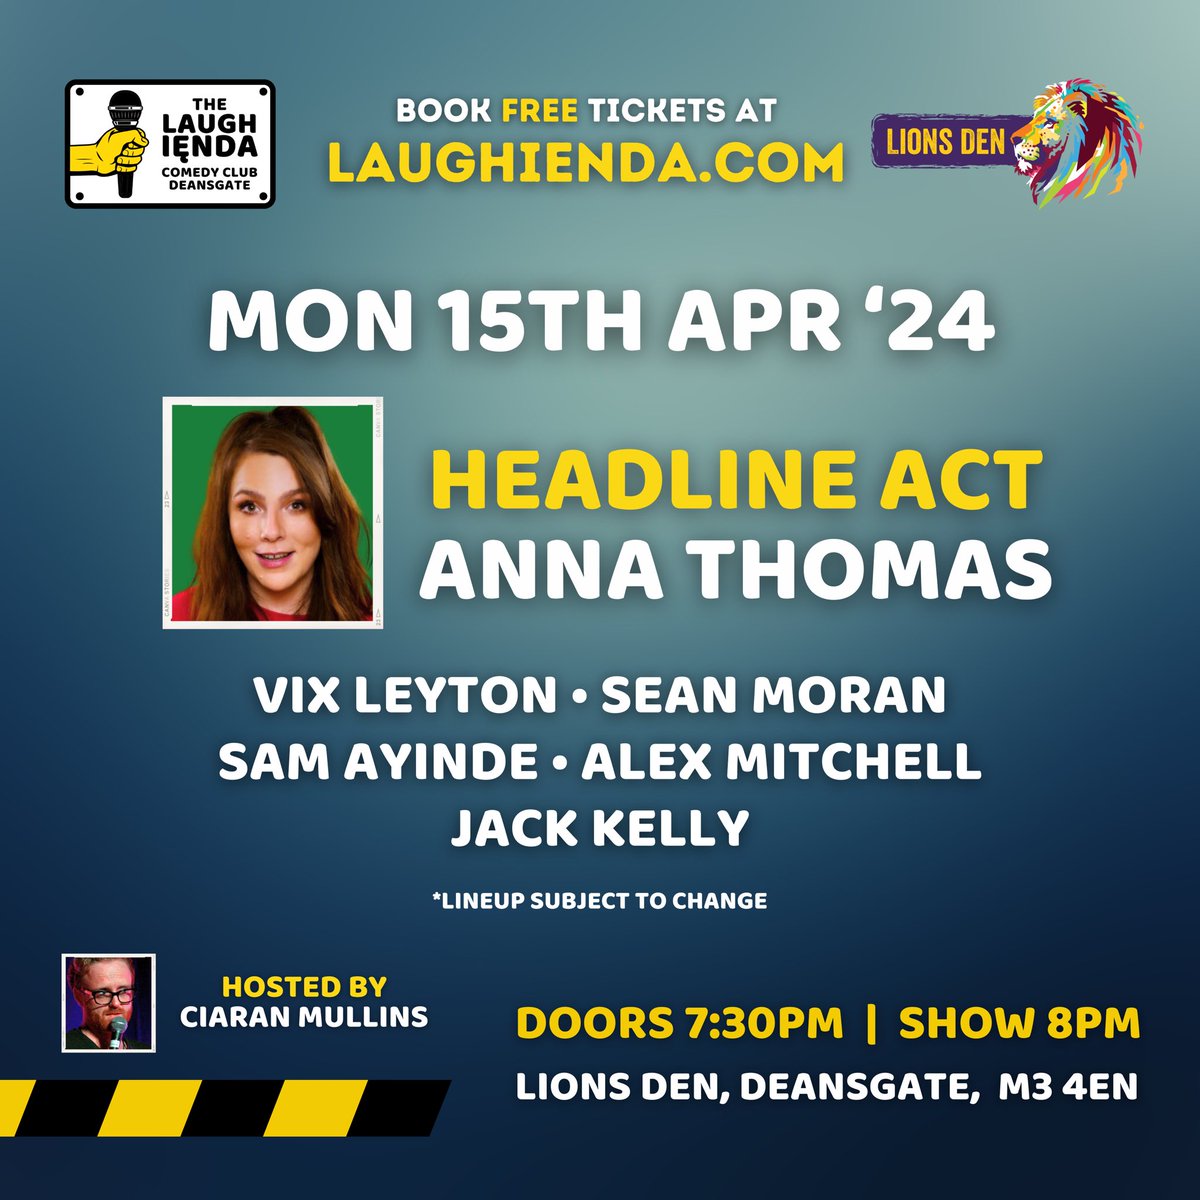 Check out these belters joining us at @LionsDenMCR tomorrow night! 🔥🔥🔥

FREE tickets here 🎟️
Laughienda.com
.
.
.

#comedy #manchester #standup #free #funny #comedian #events #deansgate #laughienda #lionsden #Mondays